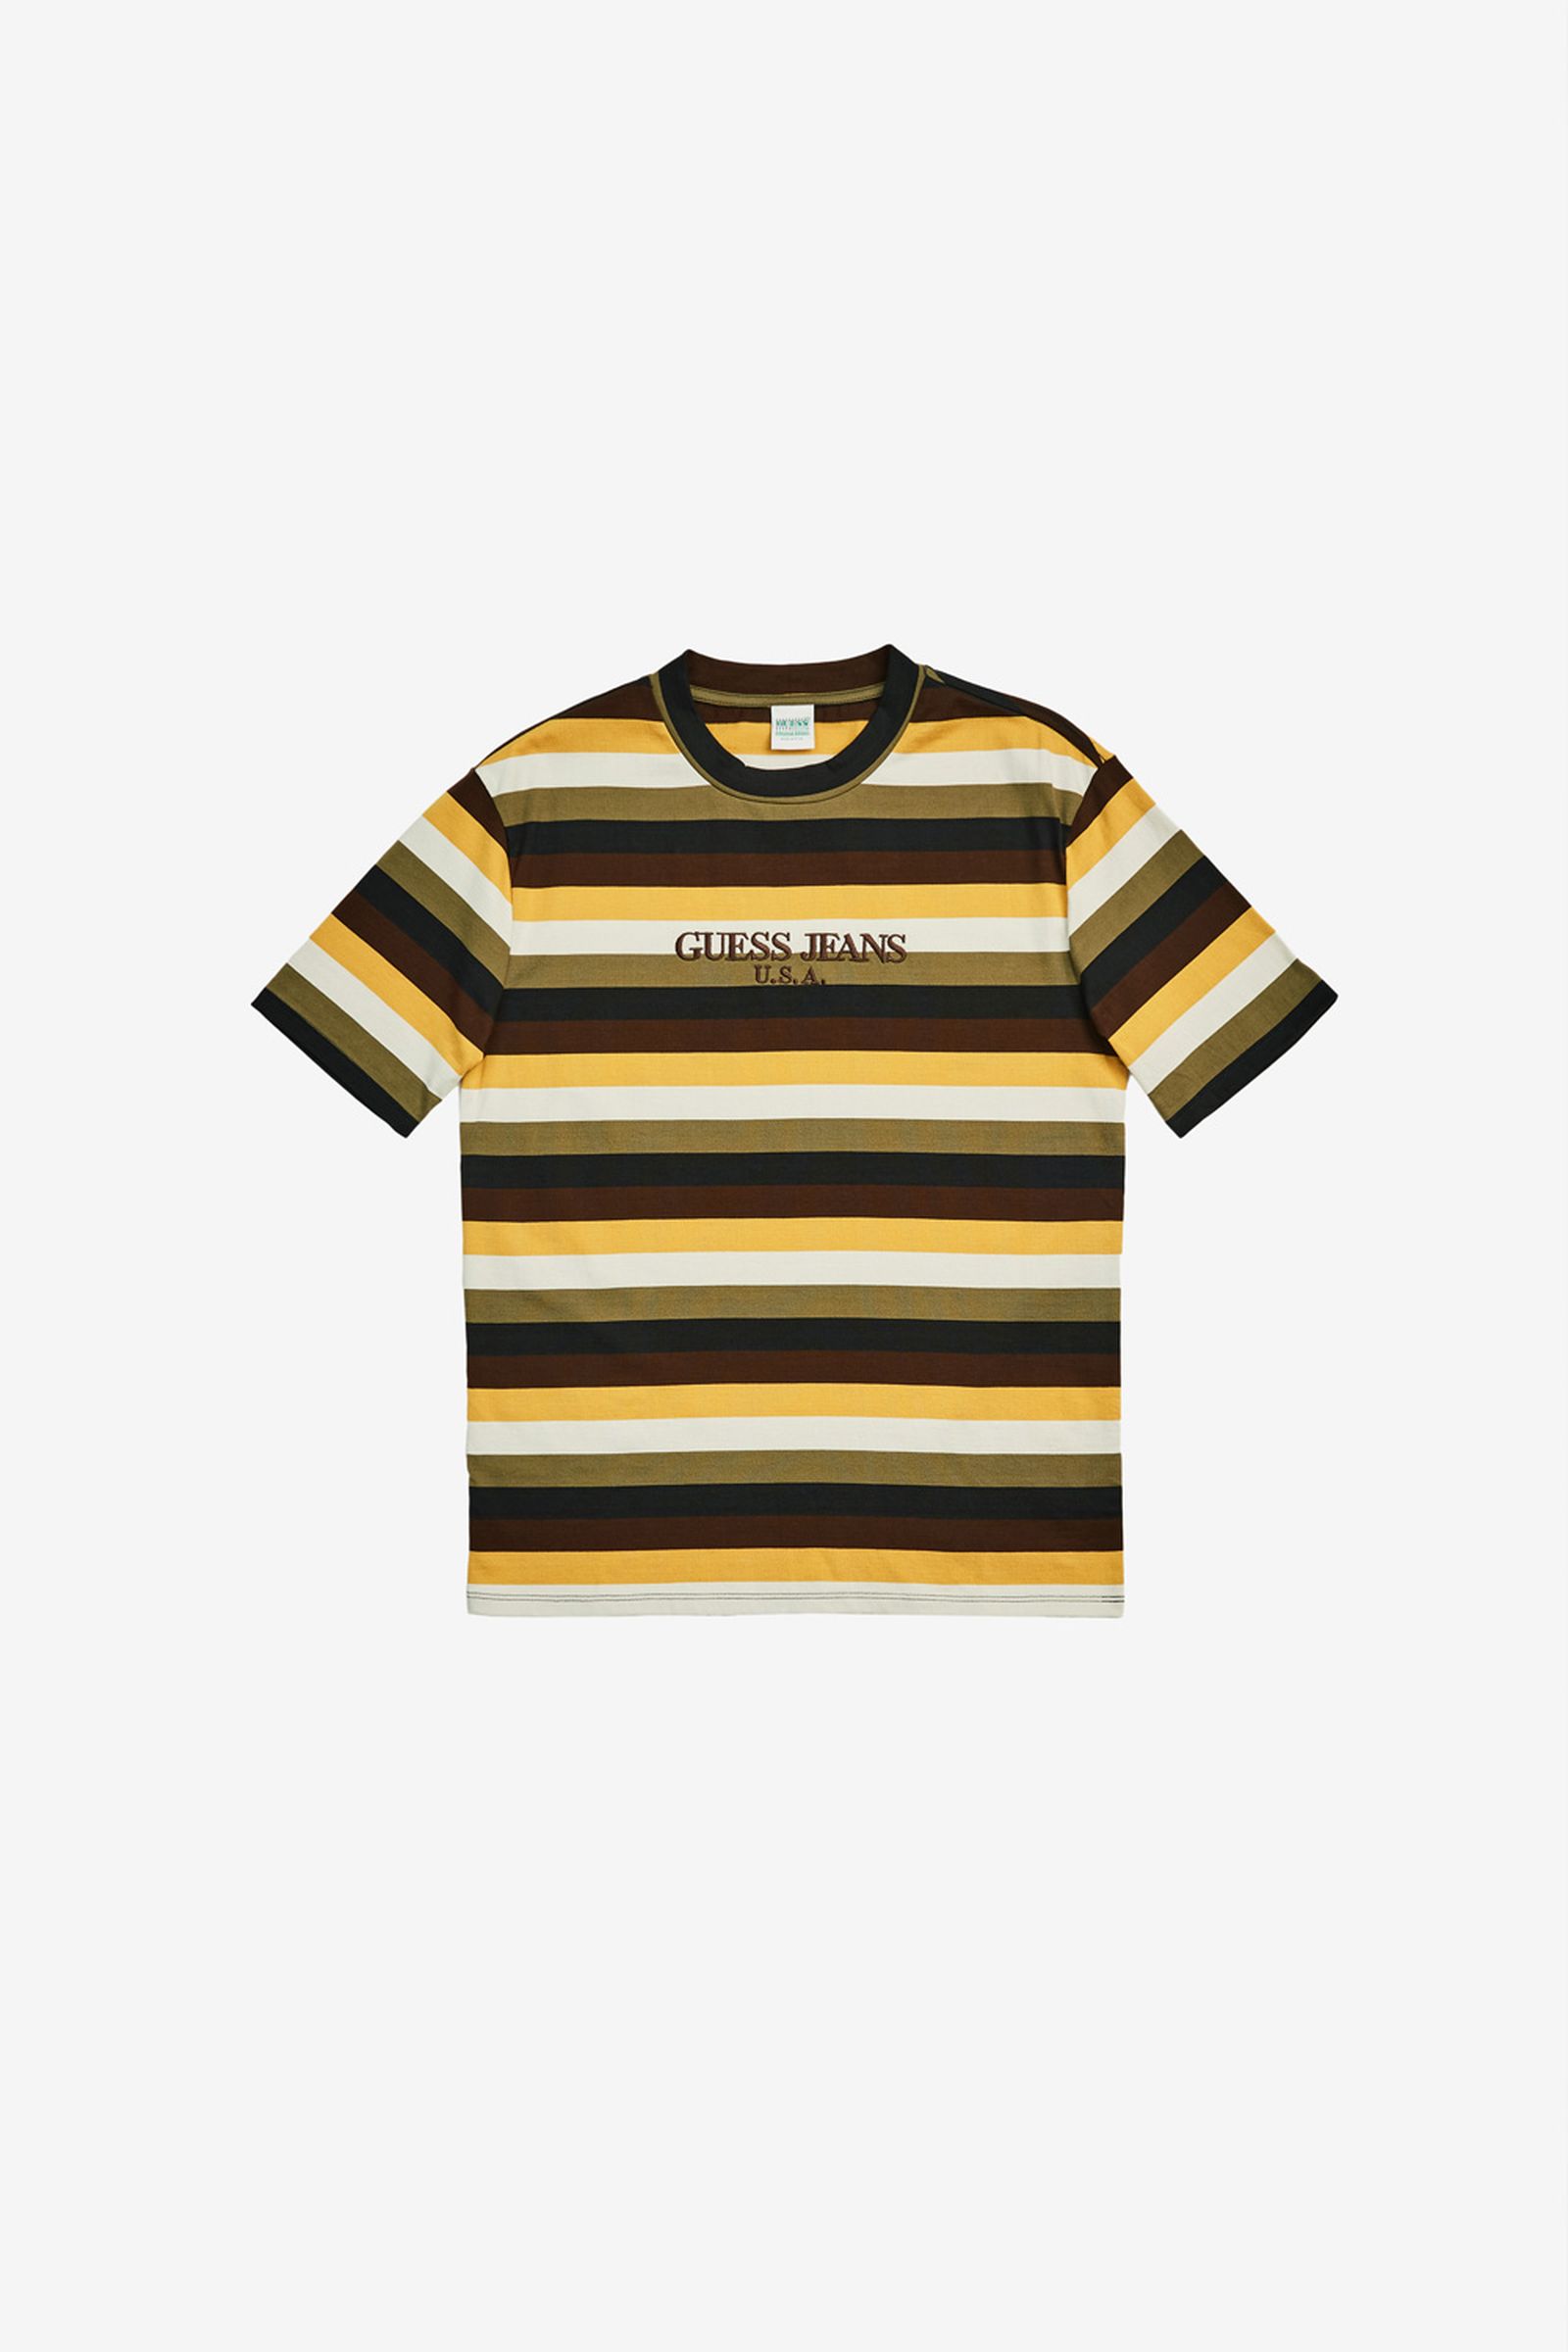 fall guess Guess Jeans U.S.A. Sheck Wes